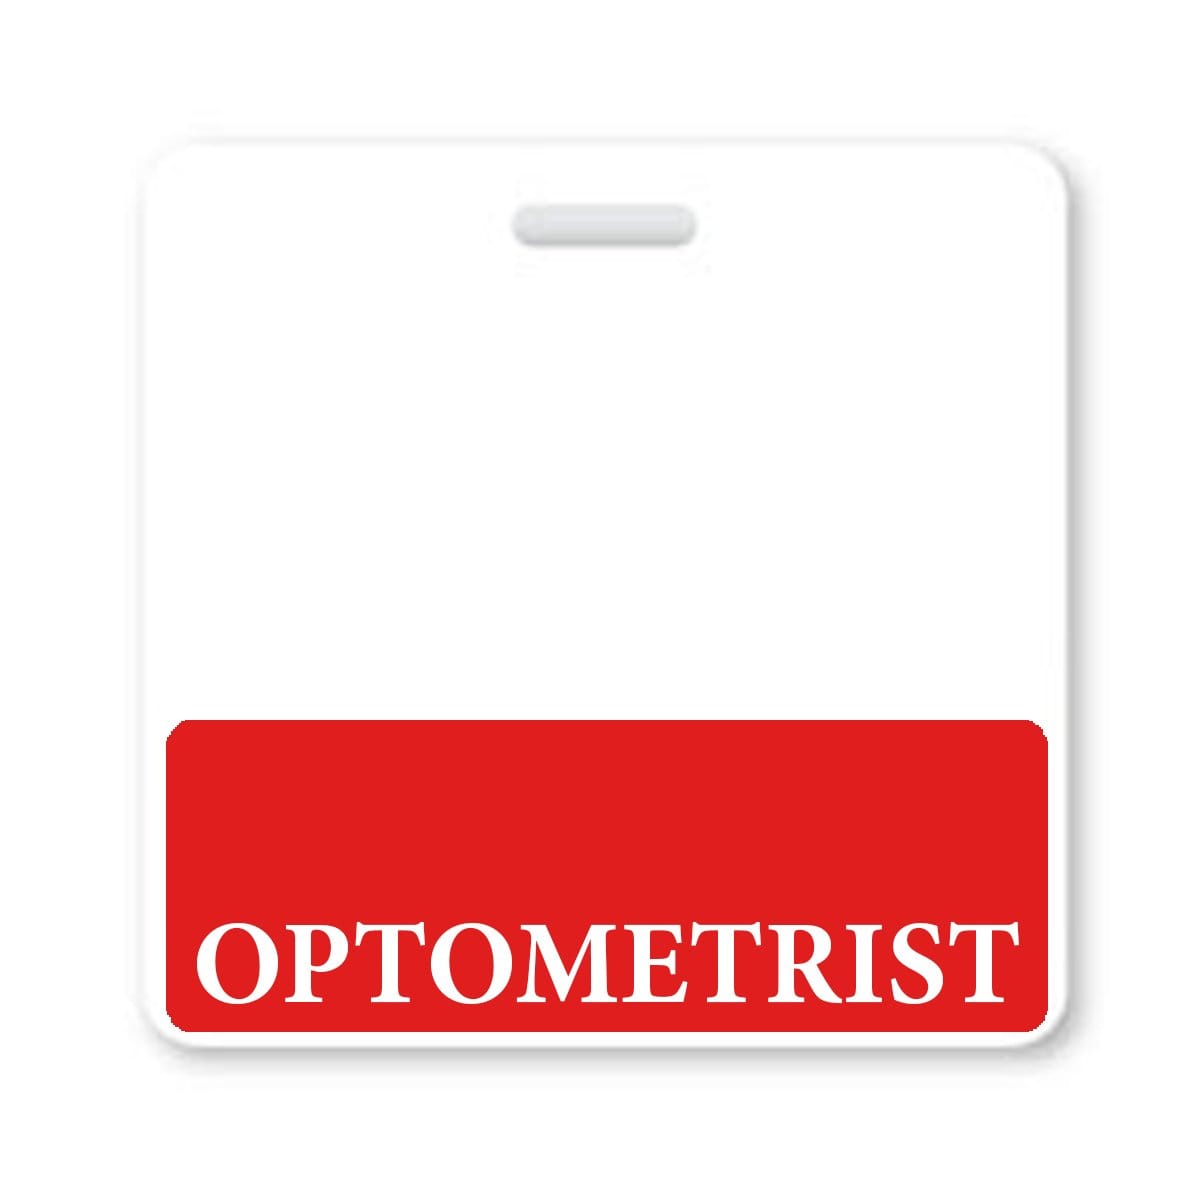 A plain white identification badge with a bold red stripe at the bottom, displaying the word "OPTOMETRIST" in white capital letters, functions as an ideal Optometrist Horizontal Badge Buddy with Red Border.